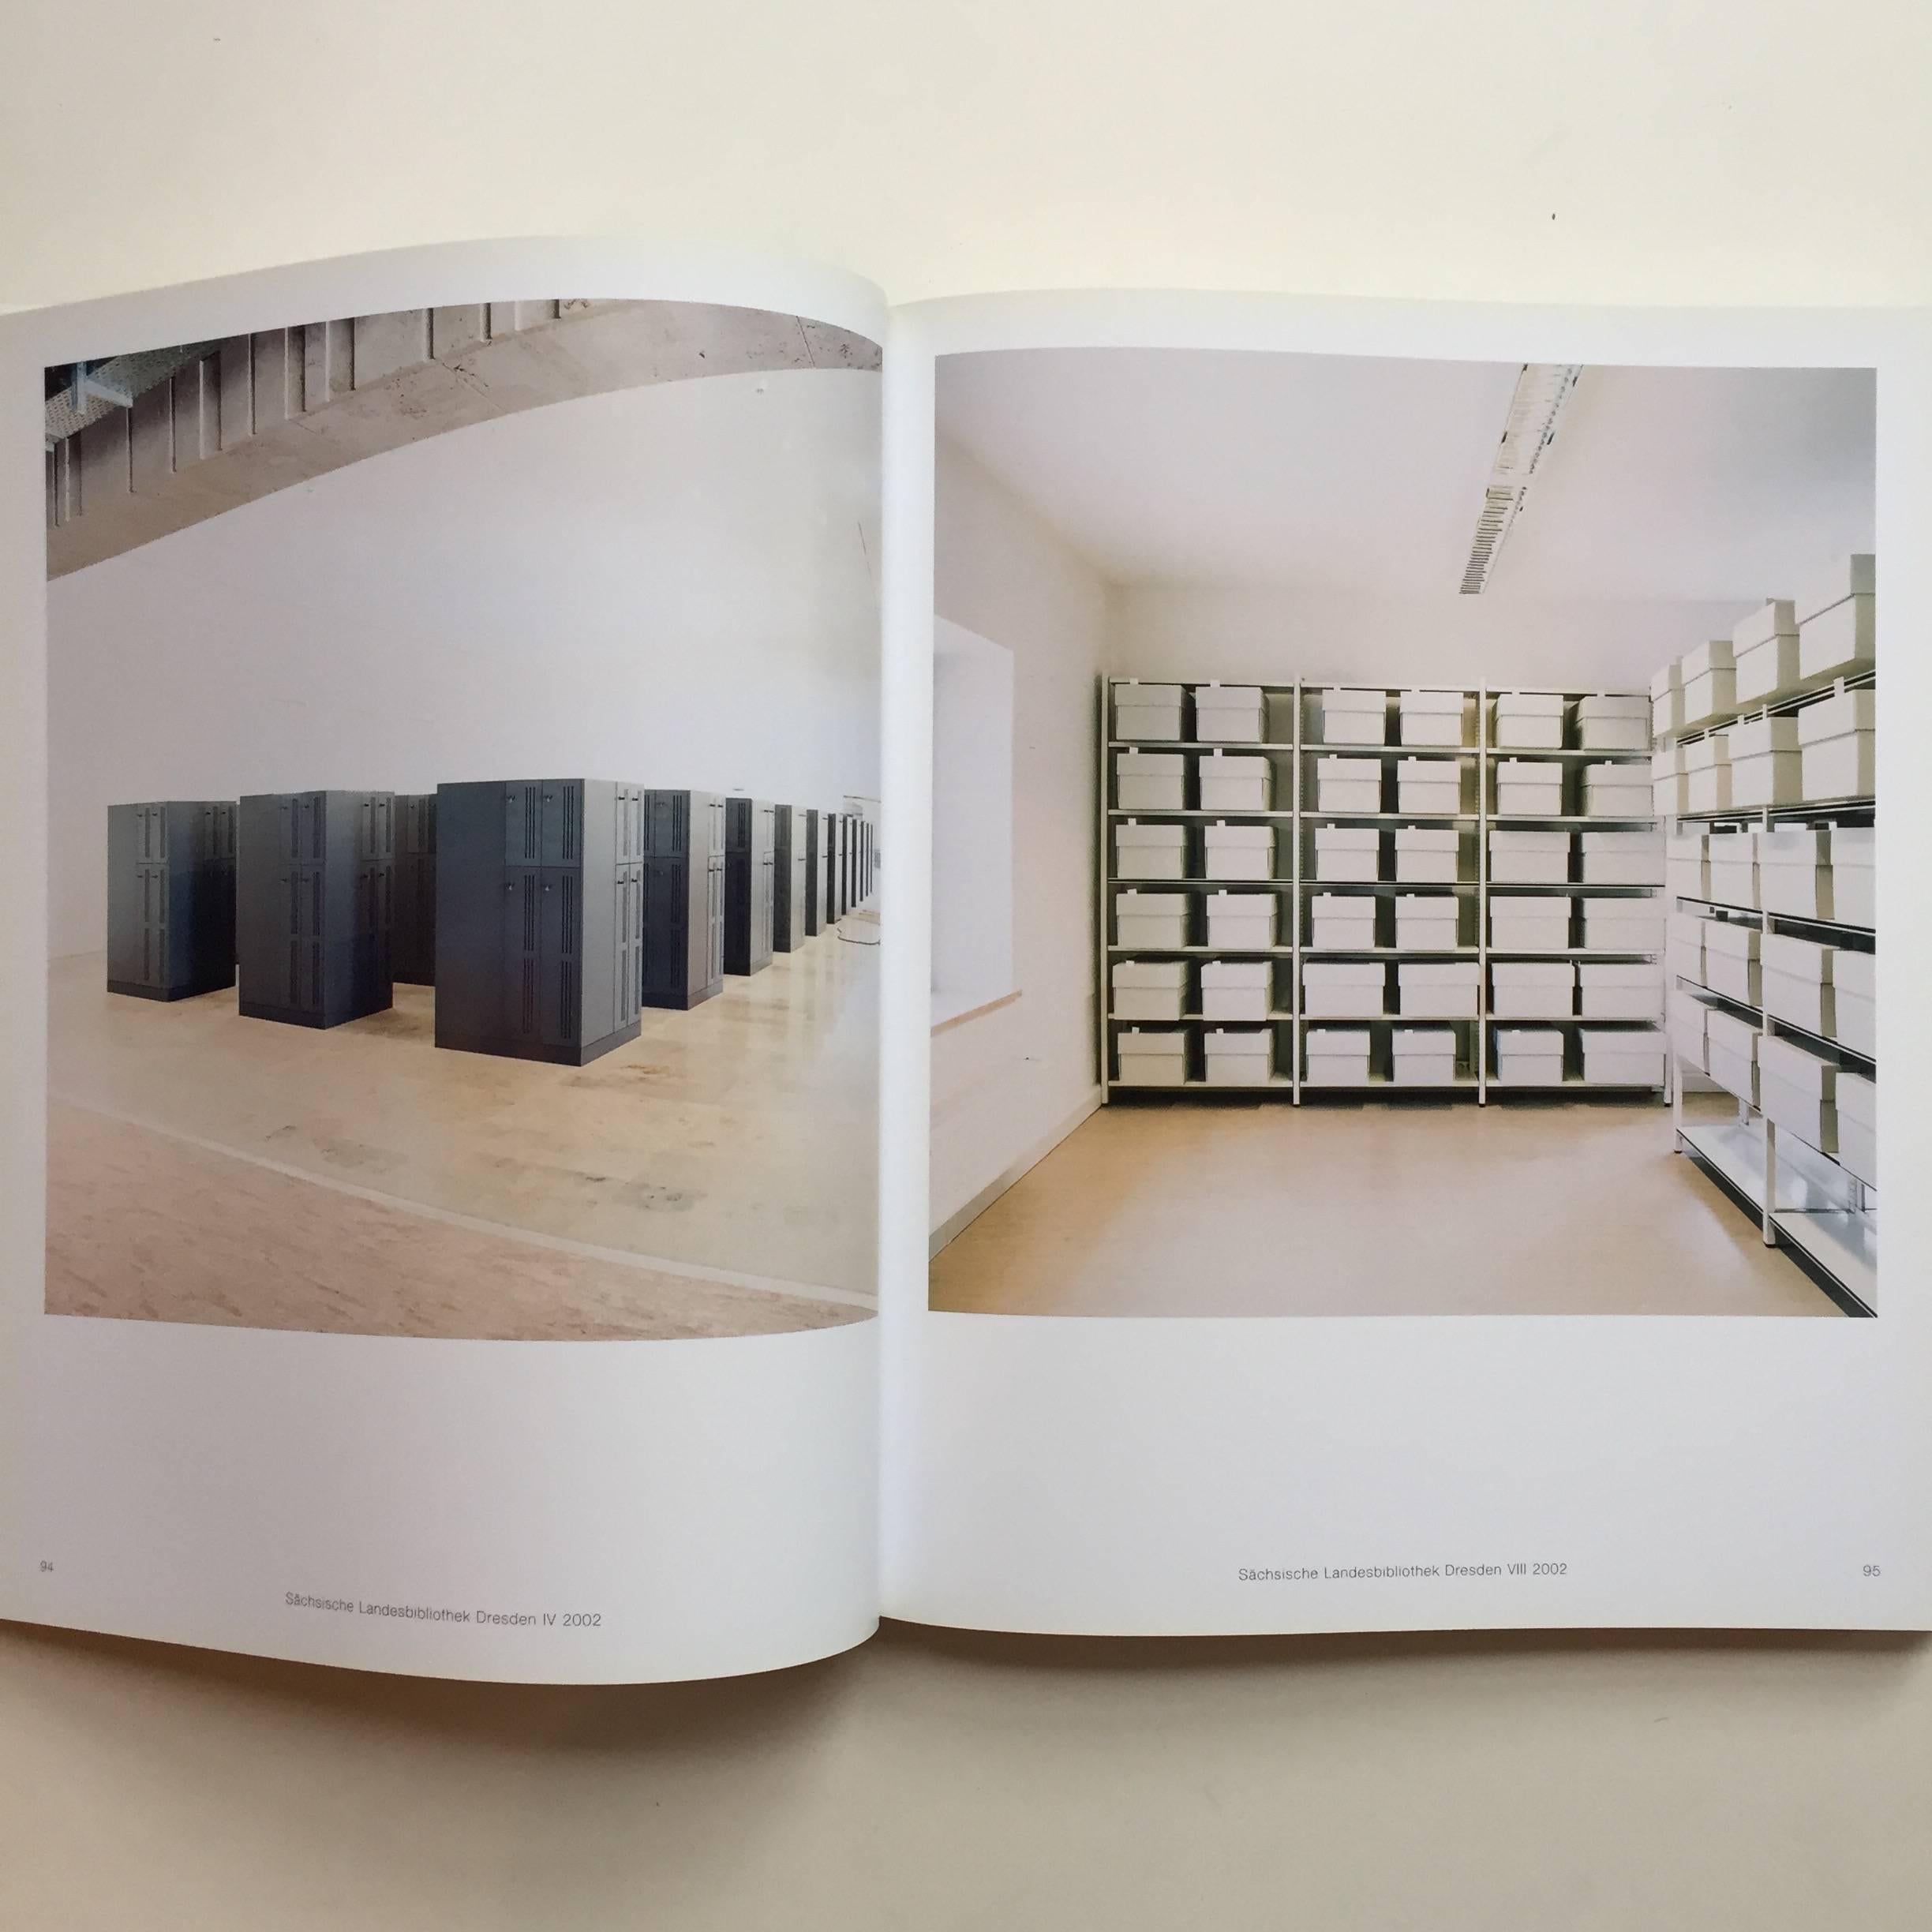 Published by Thames and Hudson, 2006. Photographs by Candida Höfer and introduction by Umberto Eco.

With an introduction by Italian novelist and bibliophile Umberto Eco, Candida Höfer’s book shows her as a master of the grand interior photograph,